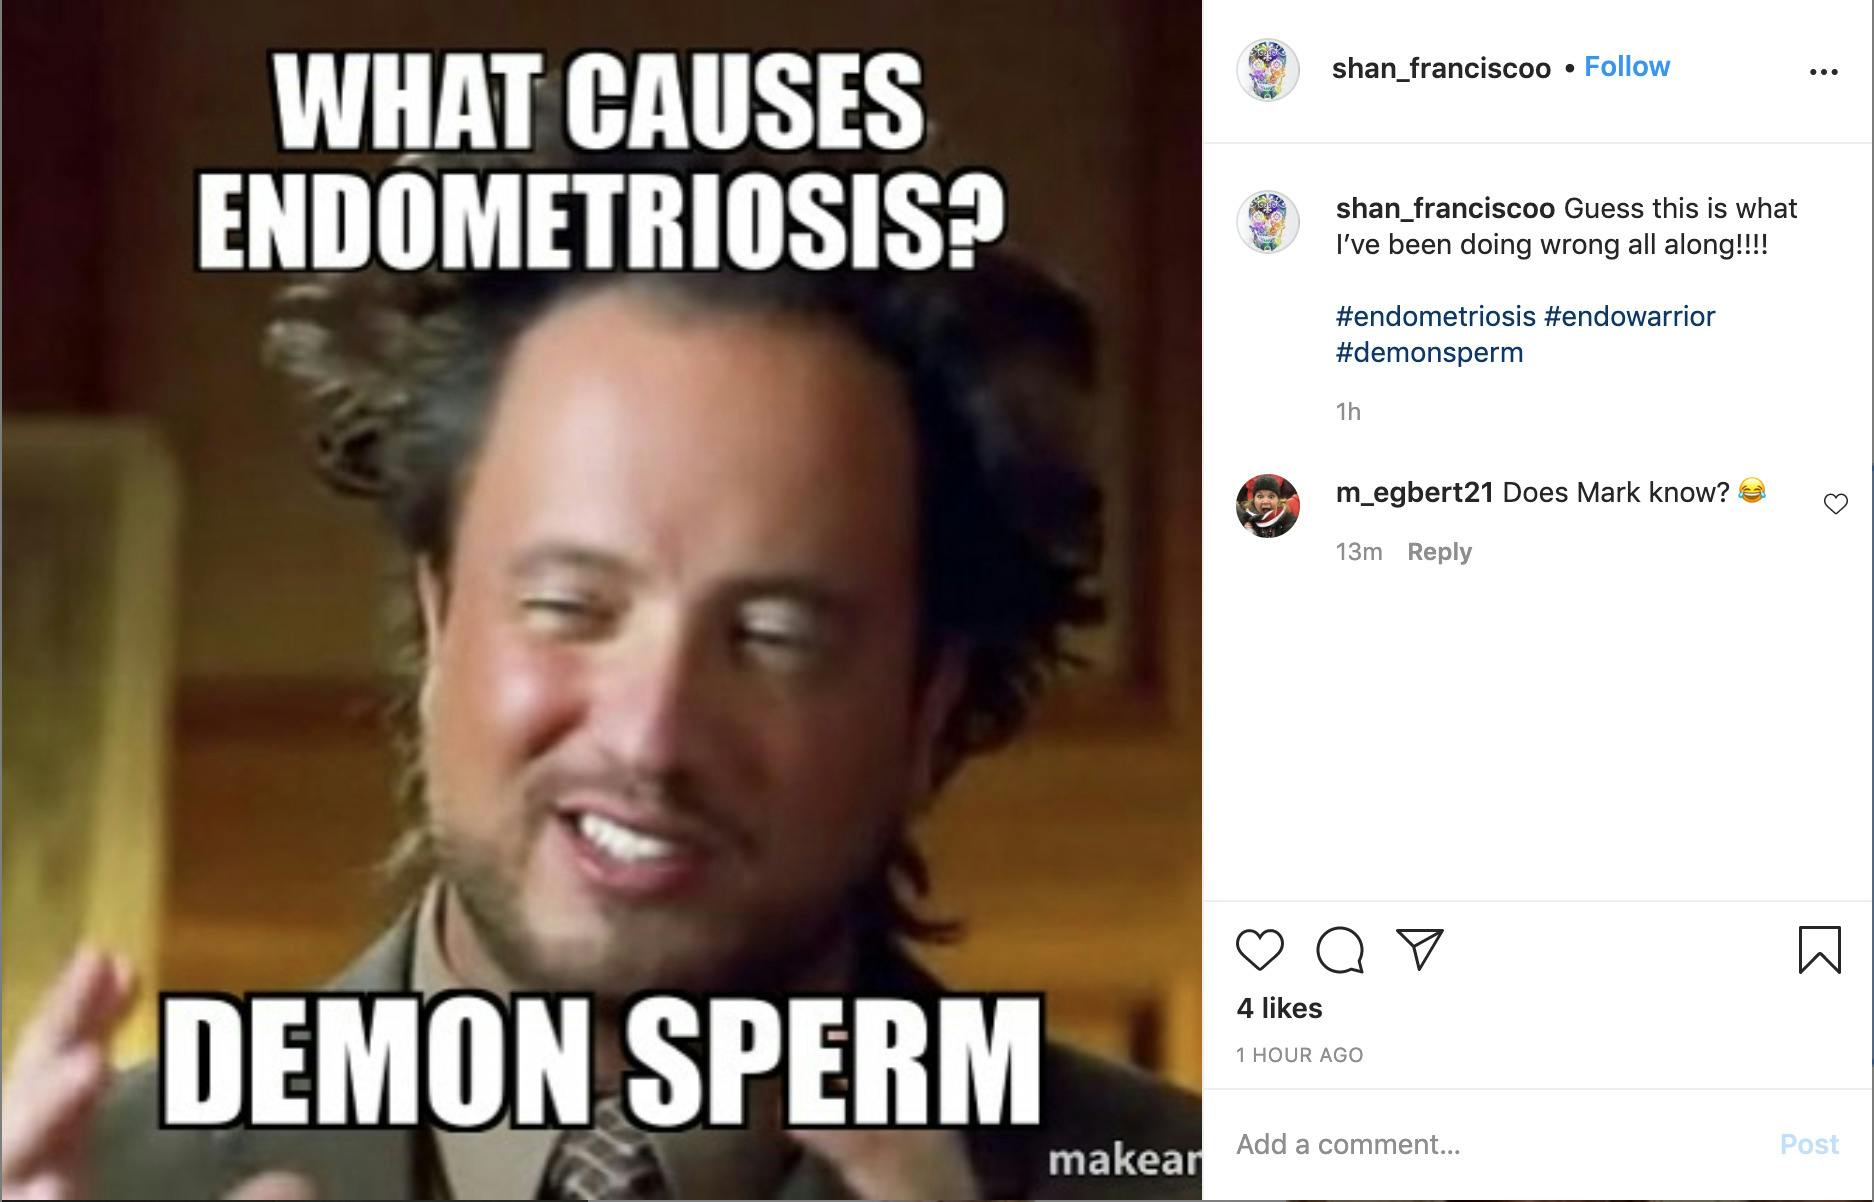 image of ancient aliens presenter with text "what causes endometriosis? Demon sperm" caption "Guess this is what I’ve been doing wrong all along!!!!  #endometriosis #endowarrior #demonsperm"